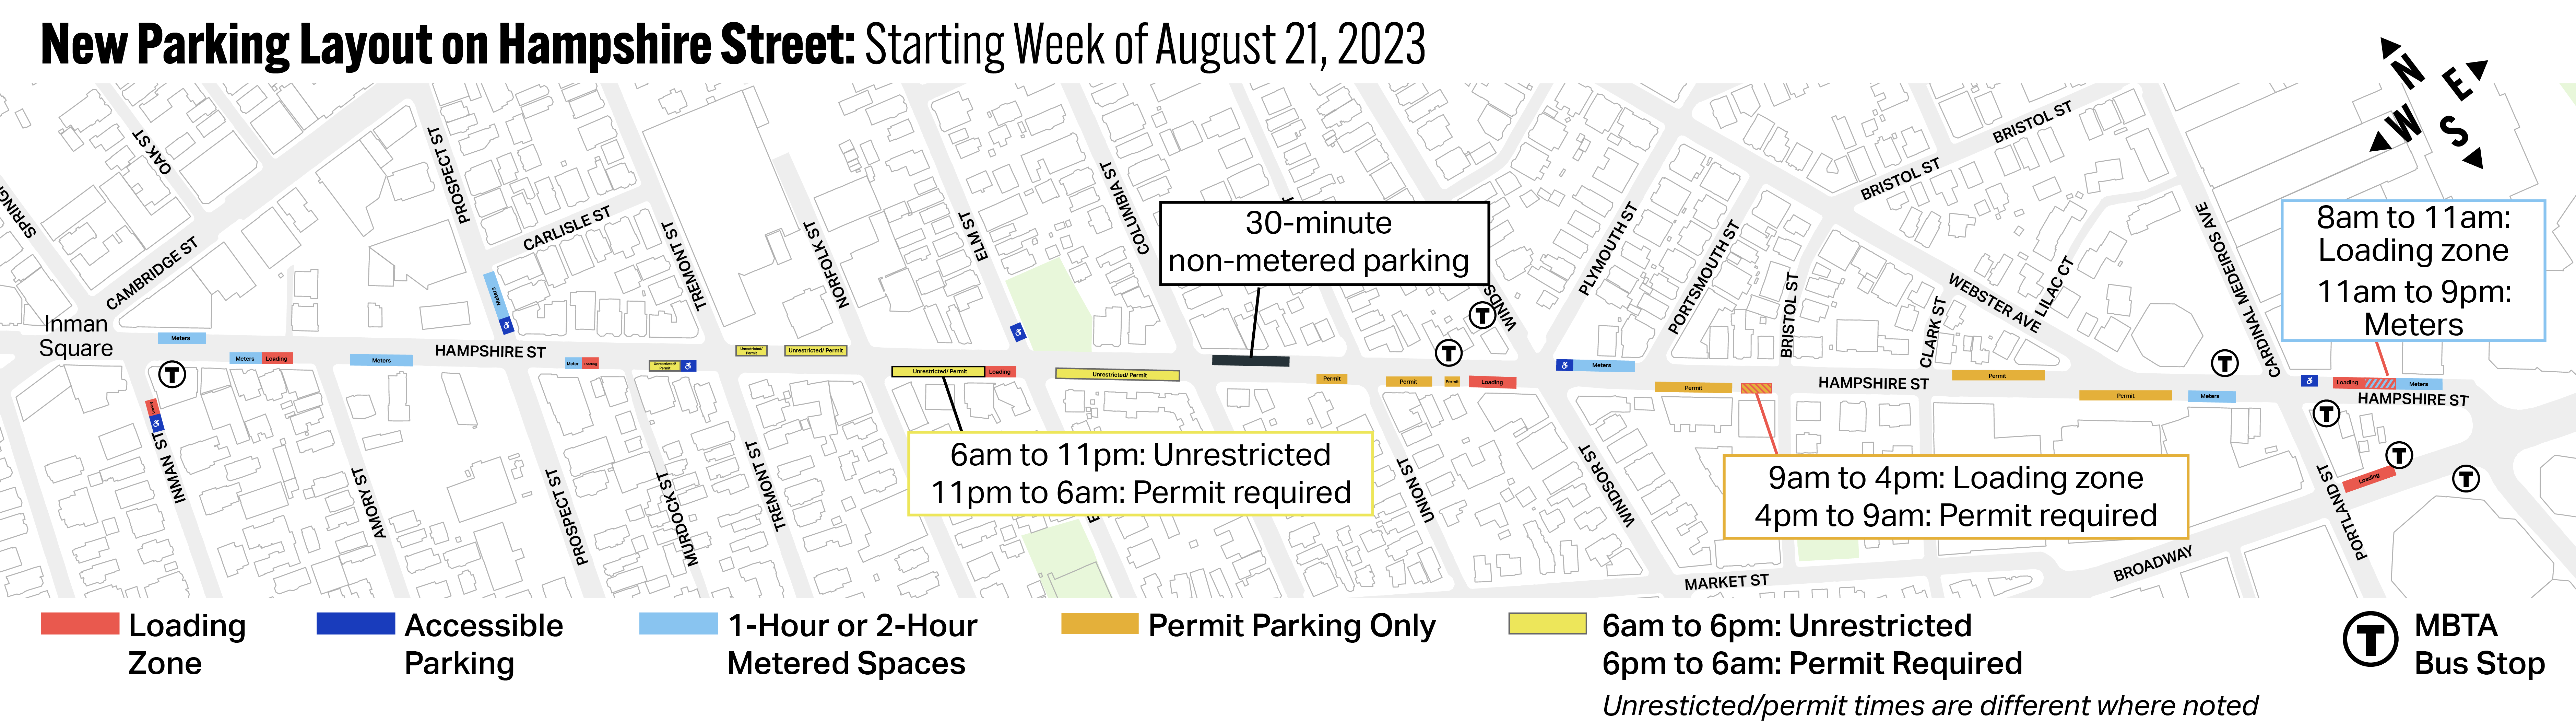 Map shows parking layout on Hampshire Street beginning August 21, 2023. Includes loading zones, accessible parking, 1 and 2-hour metered spaces, 30 minute non-metered parking, permit parking only spaces, and spaces that are part-time unrestricted, part-time permit required.